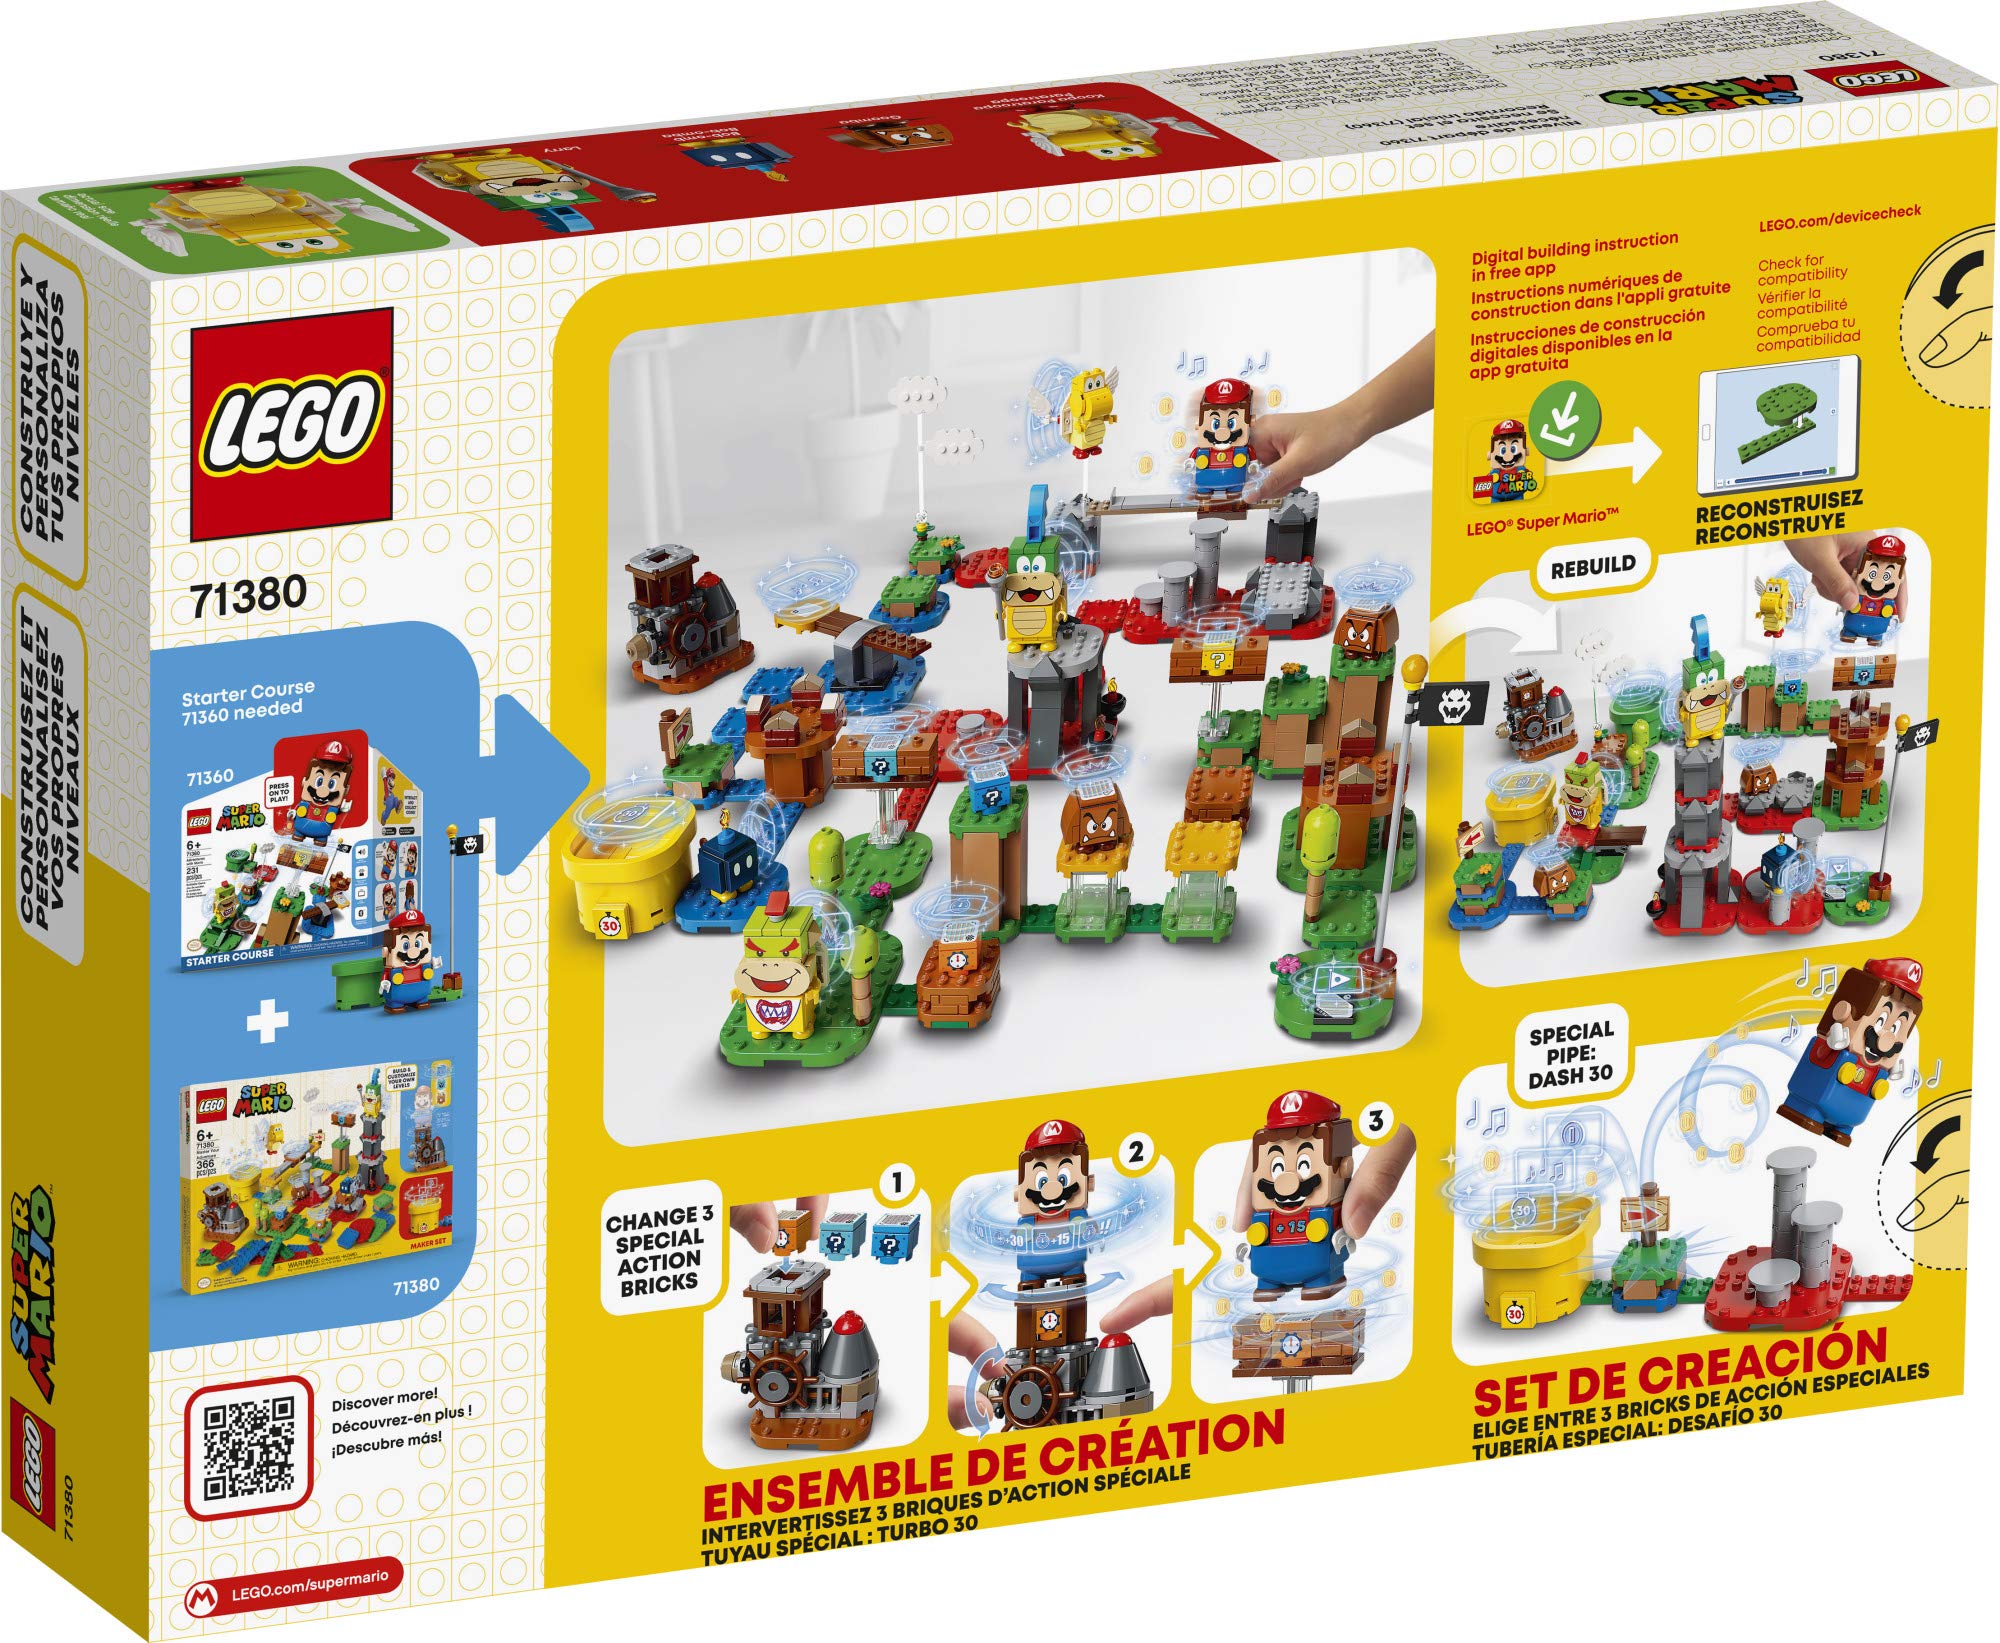 LEGO Super Mario Master Your Adventure Maker Set 71380 Building Kit; Collectible Gift Toy Playset for Creative Kids, New 2021 (366 Pieces)